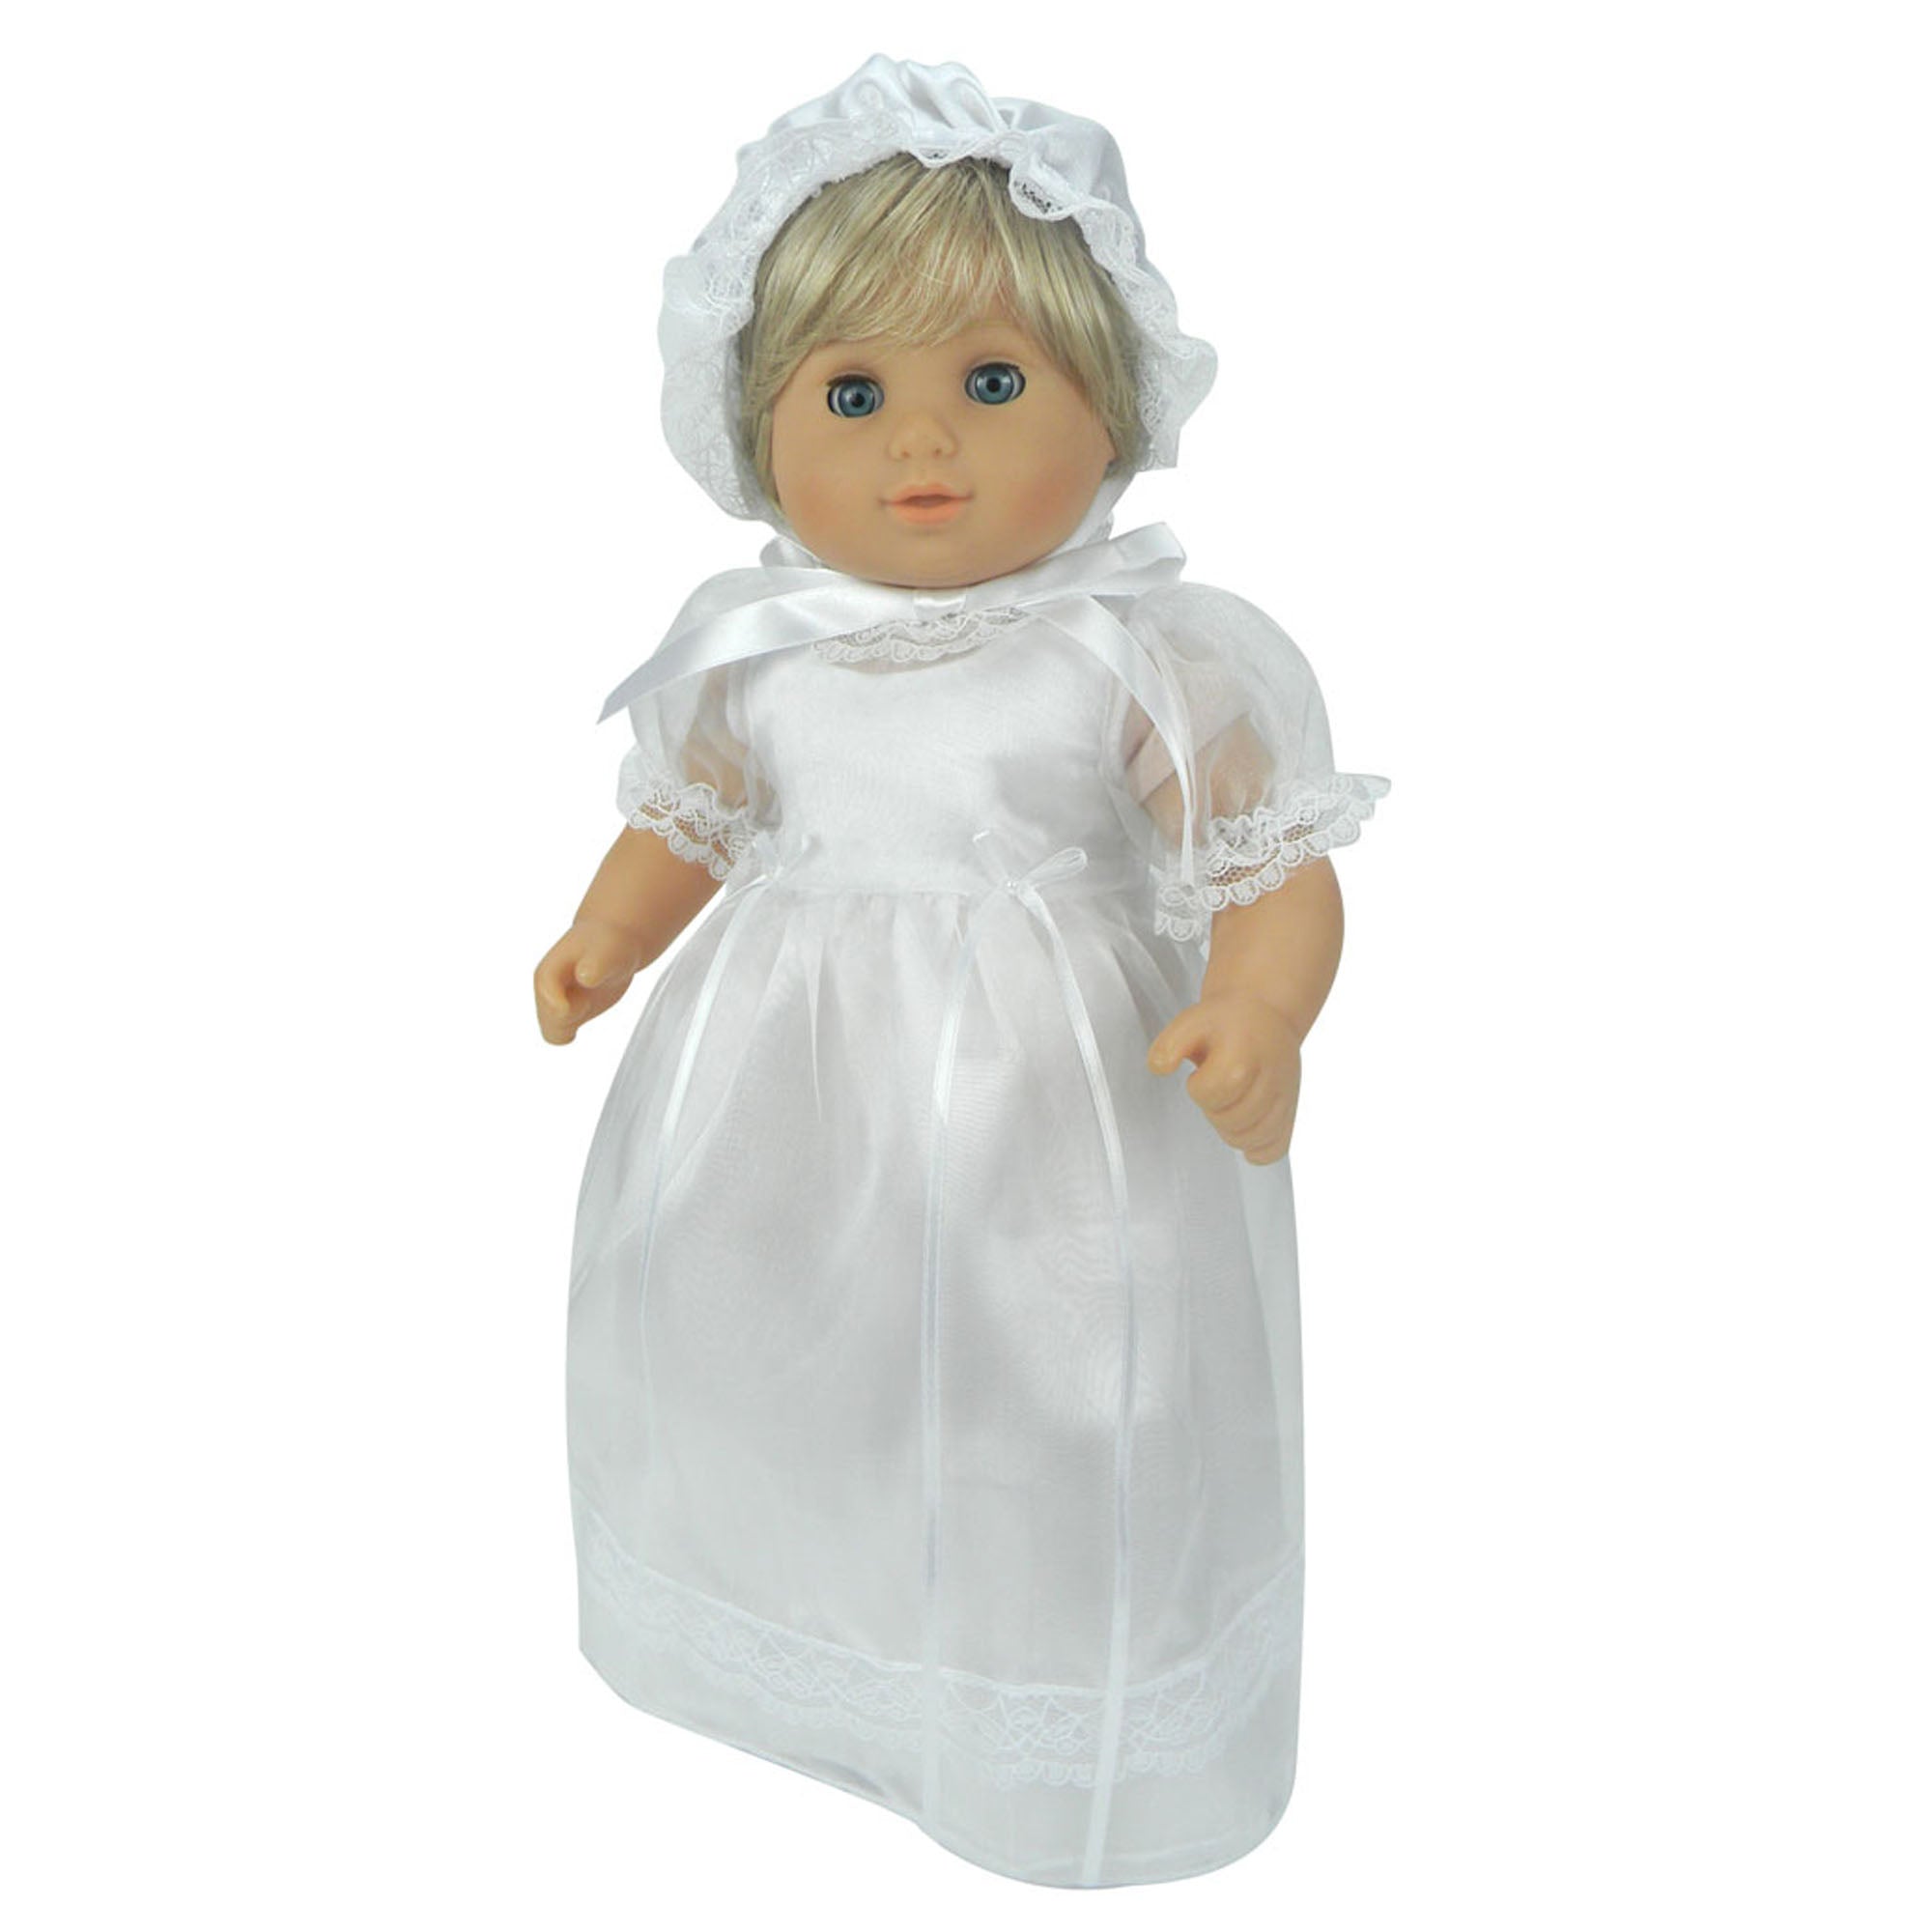 Sophia’s Special Occasion Ceremony Celebration Gown & Matching Bonnet with Lace Trim, Organza Overdress, & Ribbon Details for 15” Baby Dolls, White